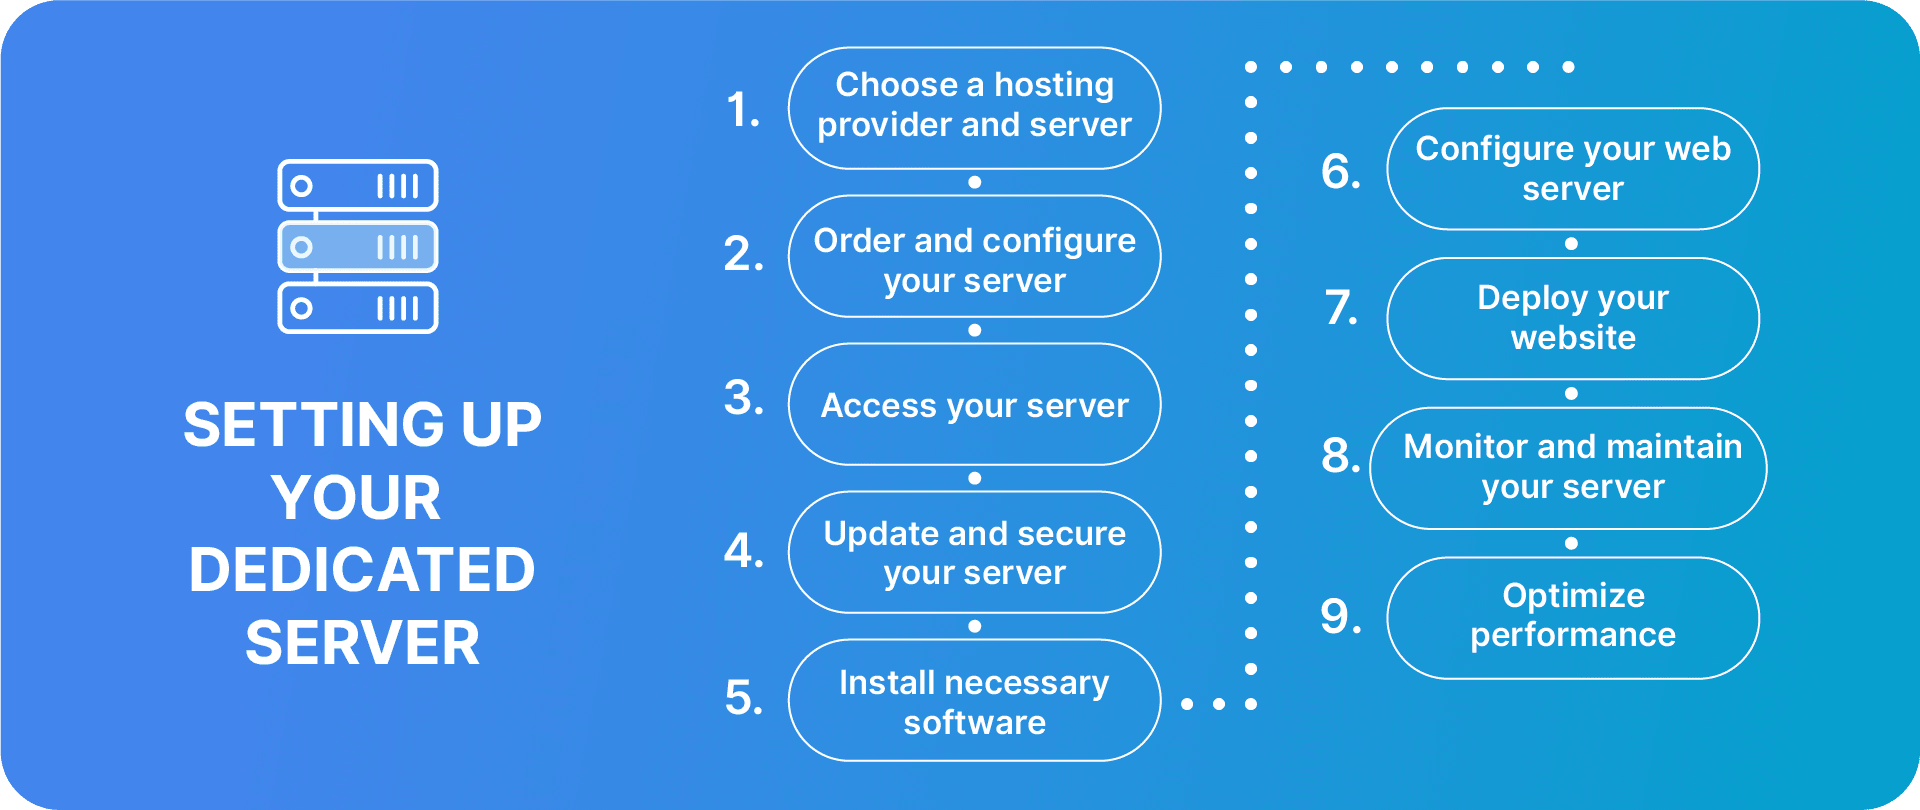 A high-level overview of setting up a dedicated server.